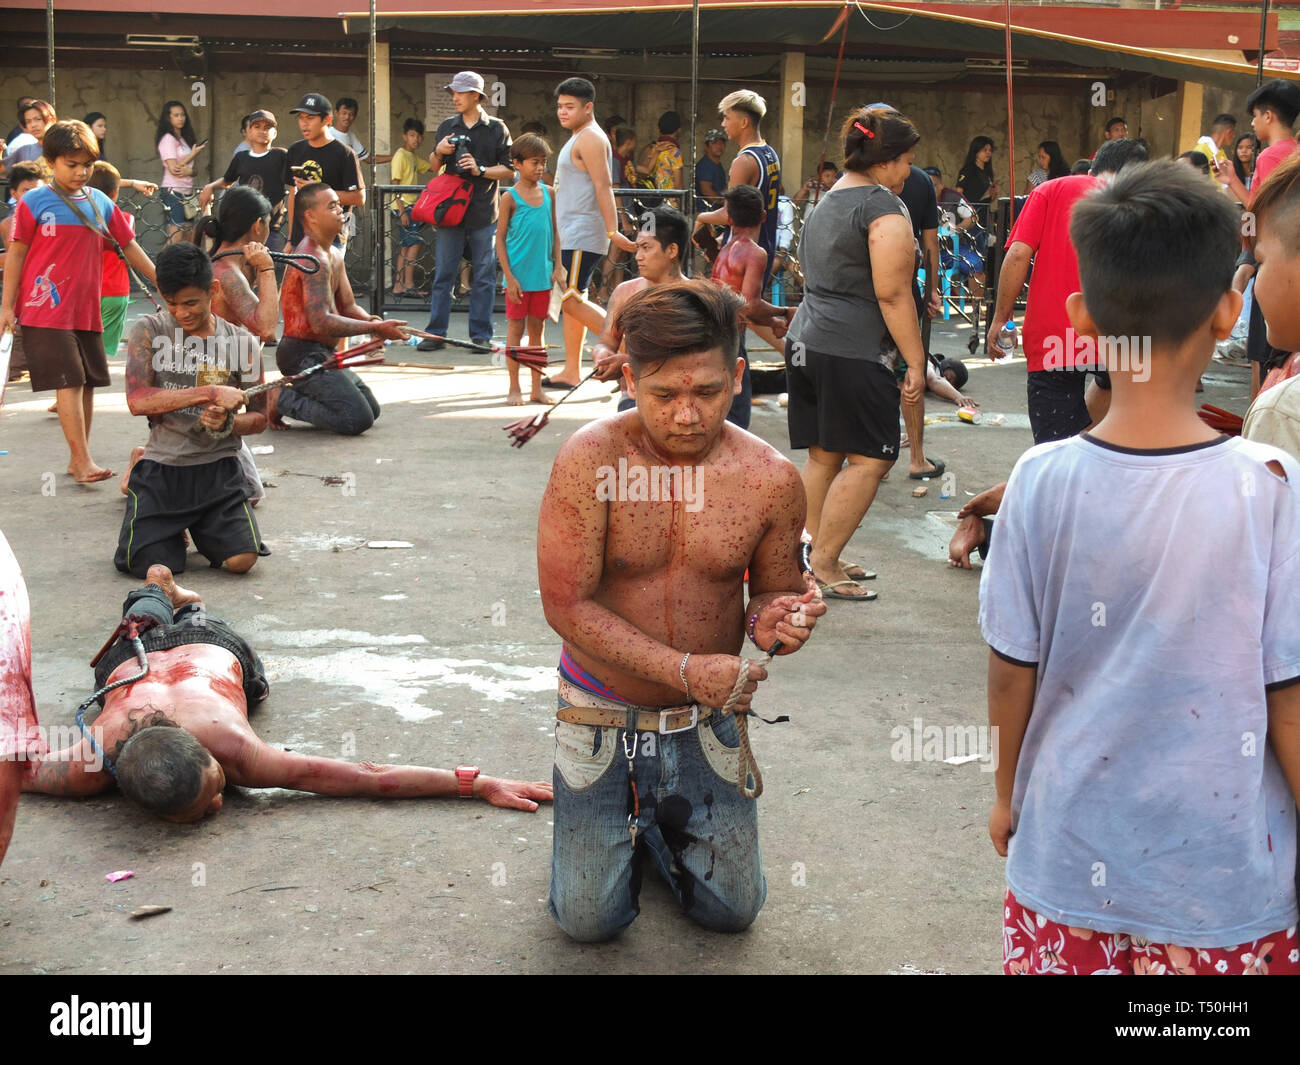 (EDITORS NOTE: Image contains graphic content) A flagellate seen full of drops of his own blood during Good Friday. Devout catholics in the deeply religious southeast asian nation of the philippines show their faith on good friday with self-flagellation or self-inflicting wounds,  imitating the suffering of christ. Stock Photo